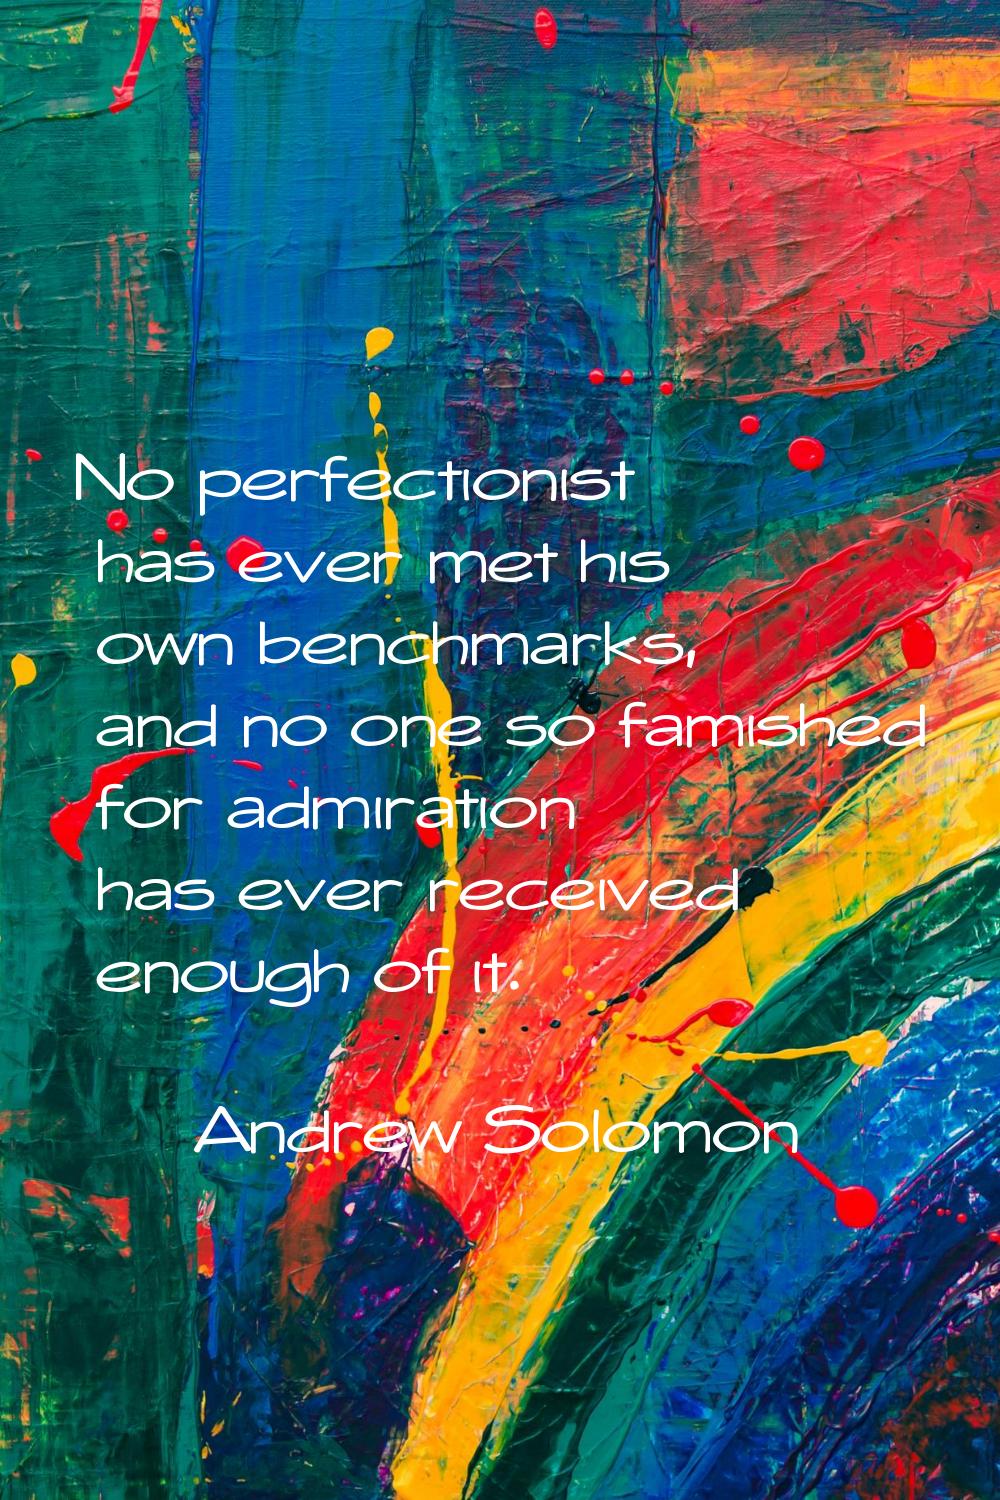 No perfectionist has ever met his own benchmarks, and no one so famished for admiration has ever re